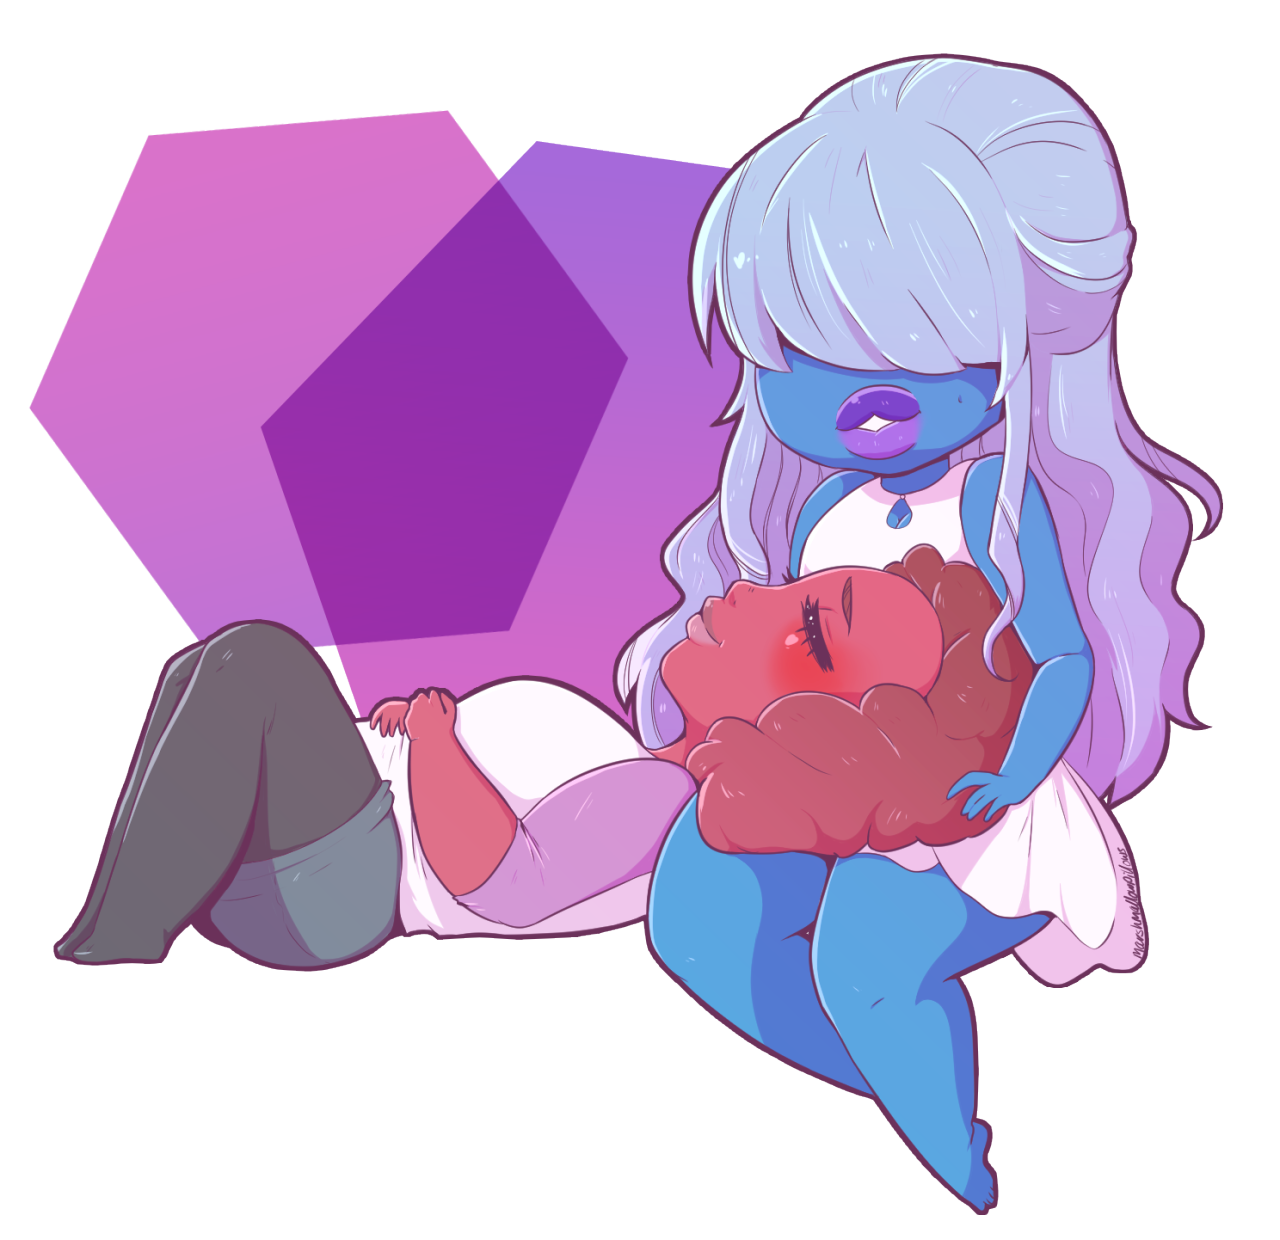 sansmatty said: Ruby and Sapphire cuddly!! (From Steven universe) Answer: